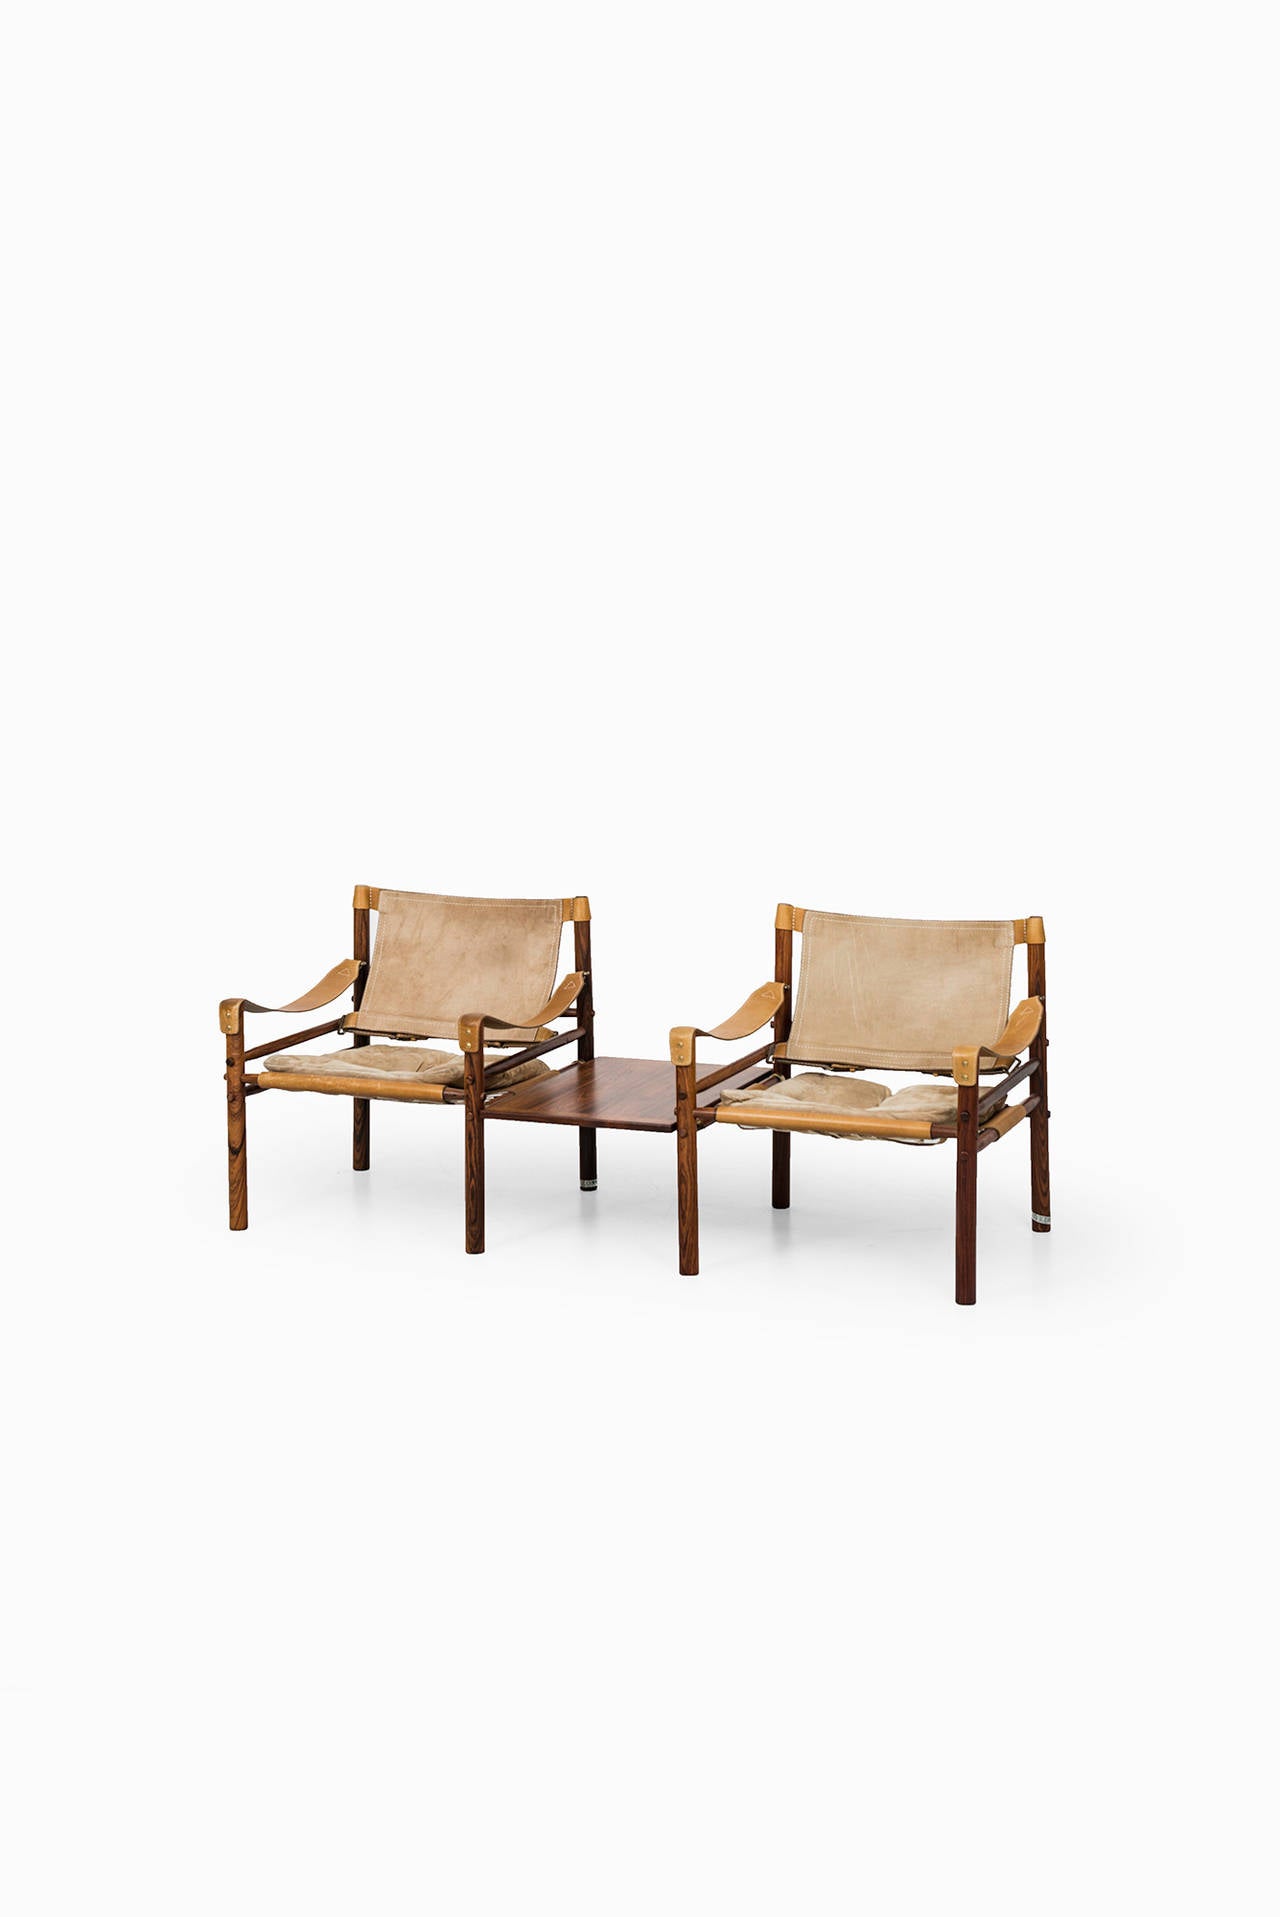 A set of 4 rare easy chairs model Sirocco / Scirocco with side tables in rosewood and original suede designed by Arne Norell. Produced by Arne Norell AB in Aneby, Sweden.